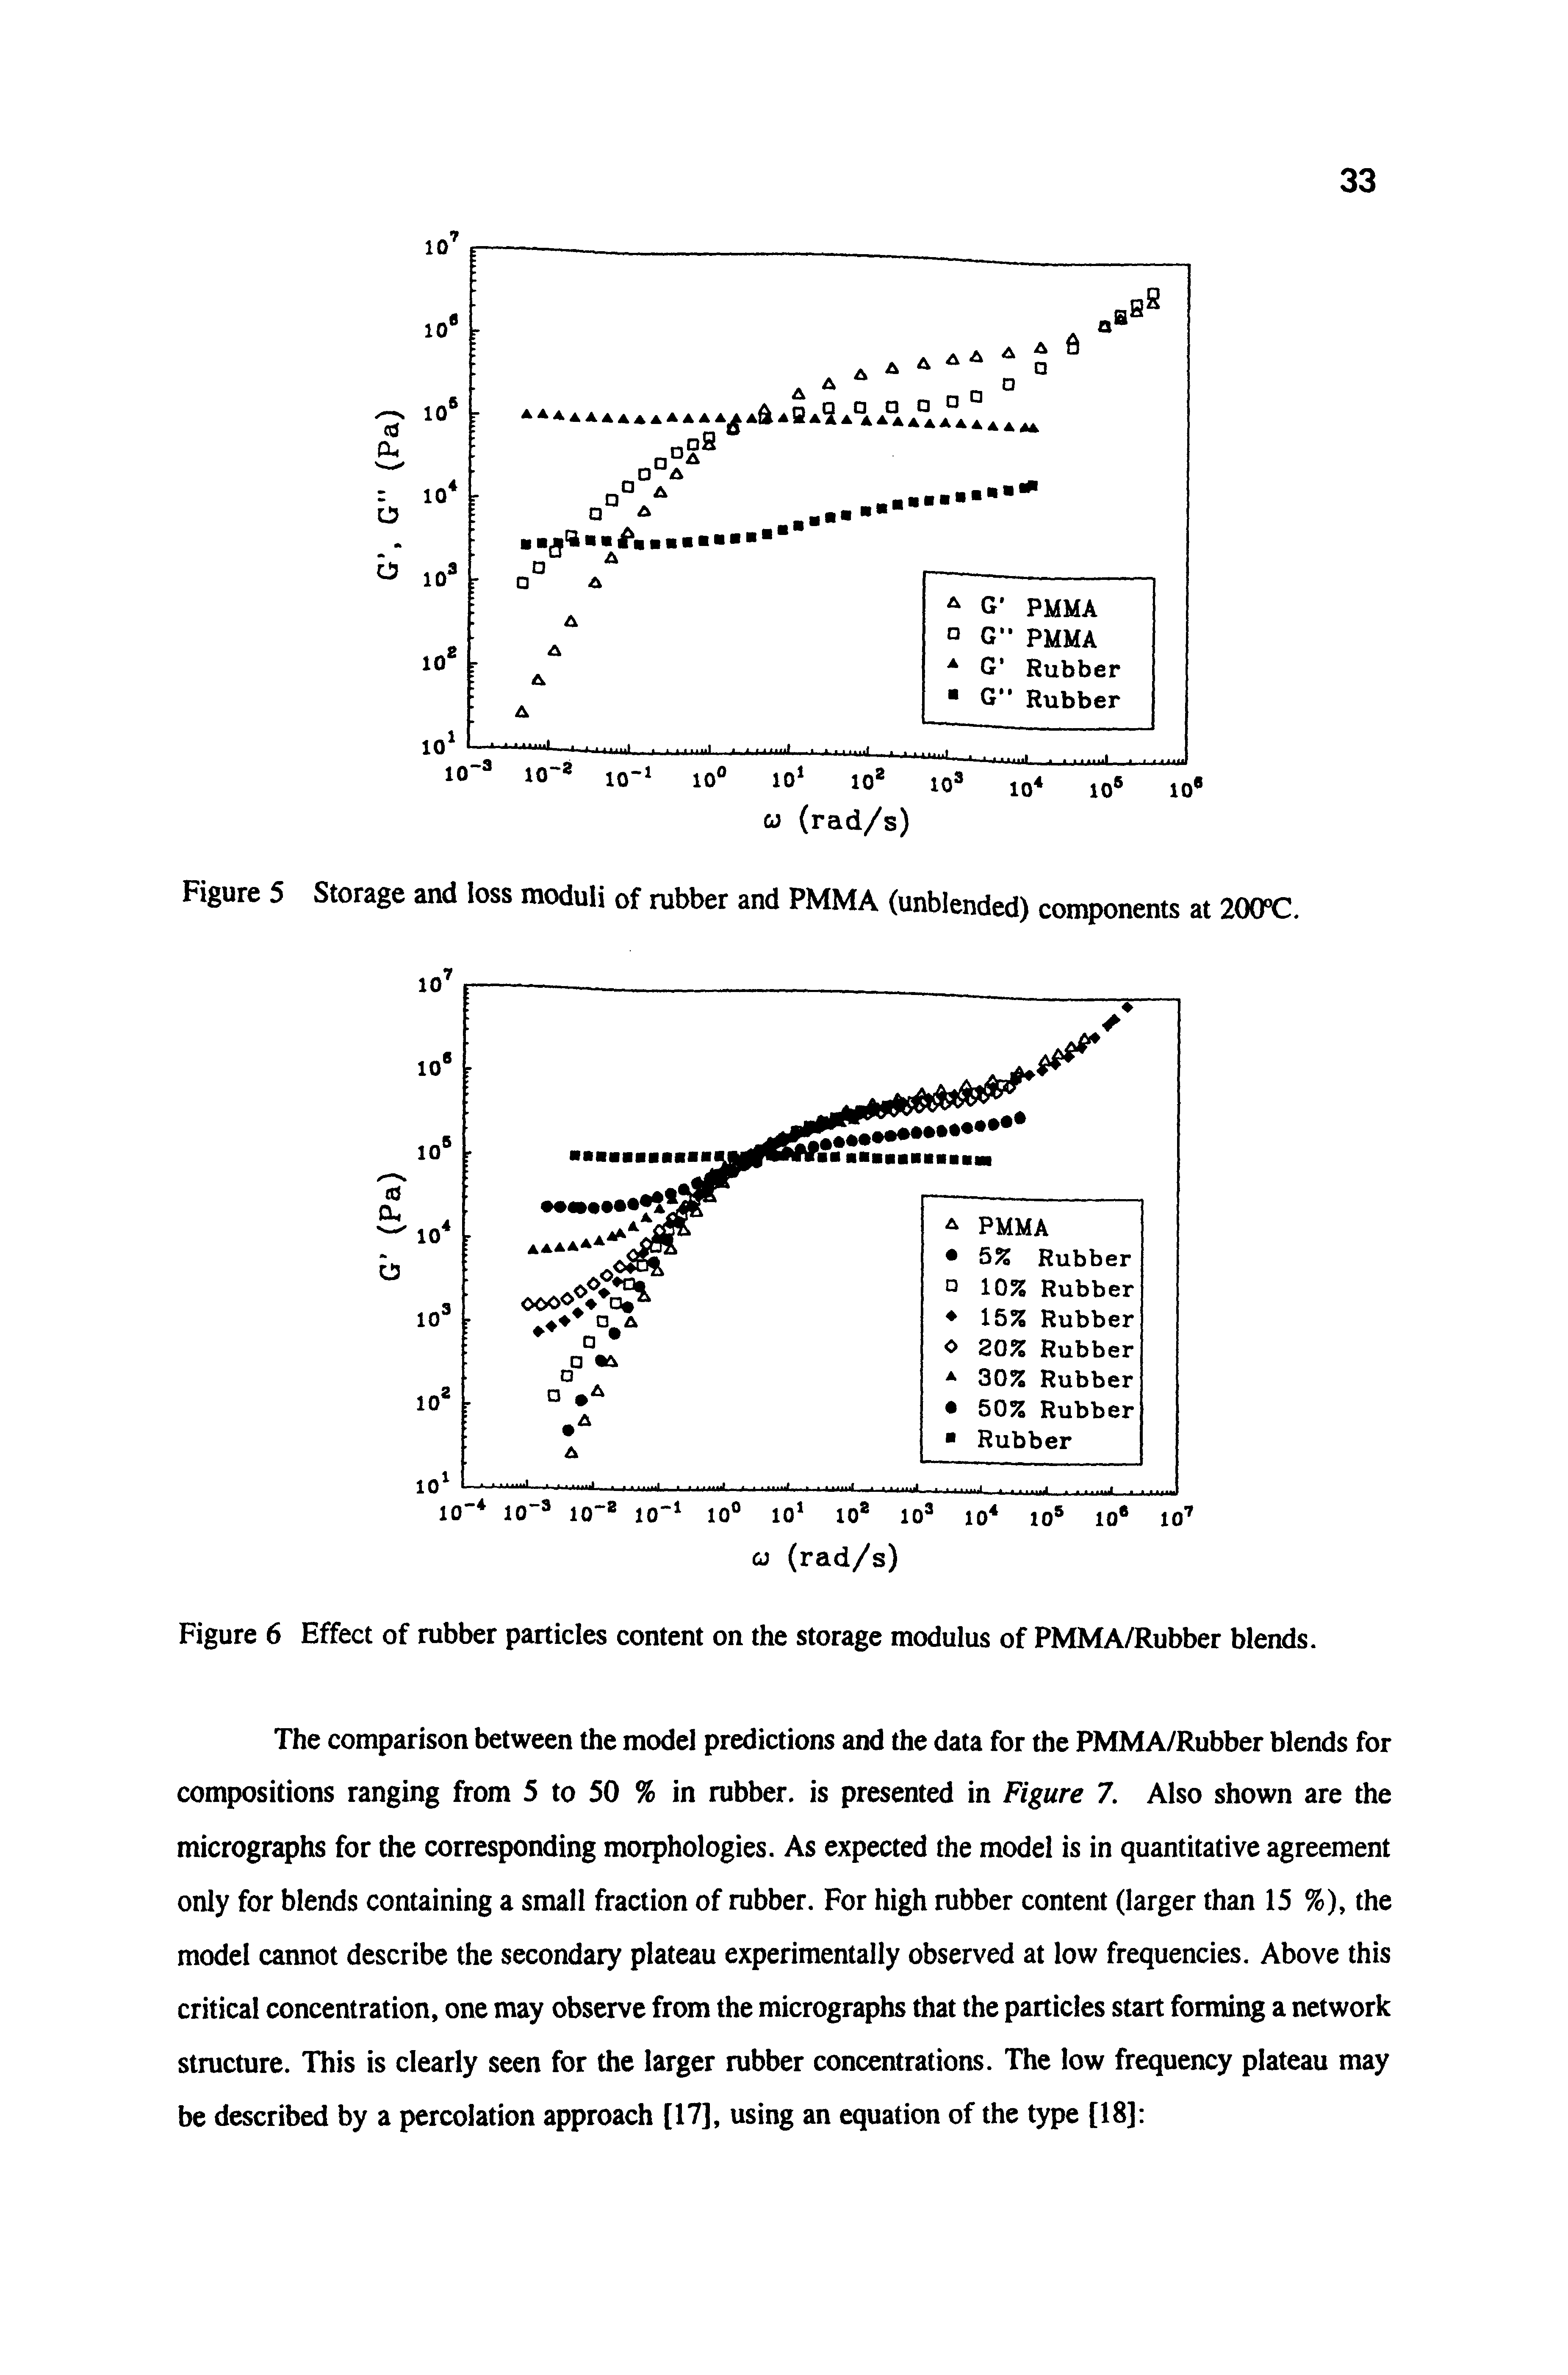 Figure 6 Effect of rubber particles content on the storage modulus of PMMA/Rubber blends.